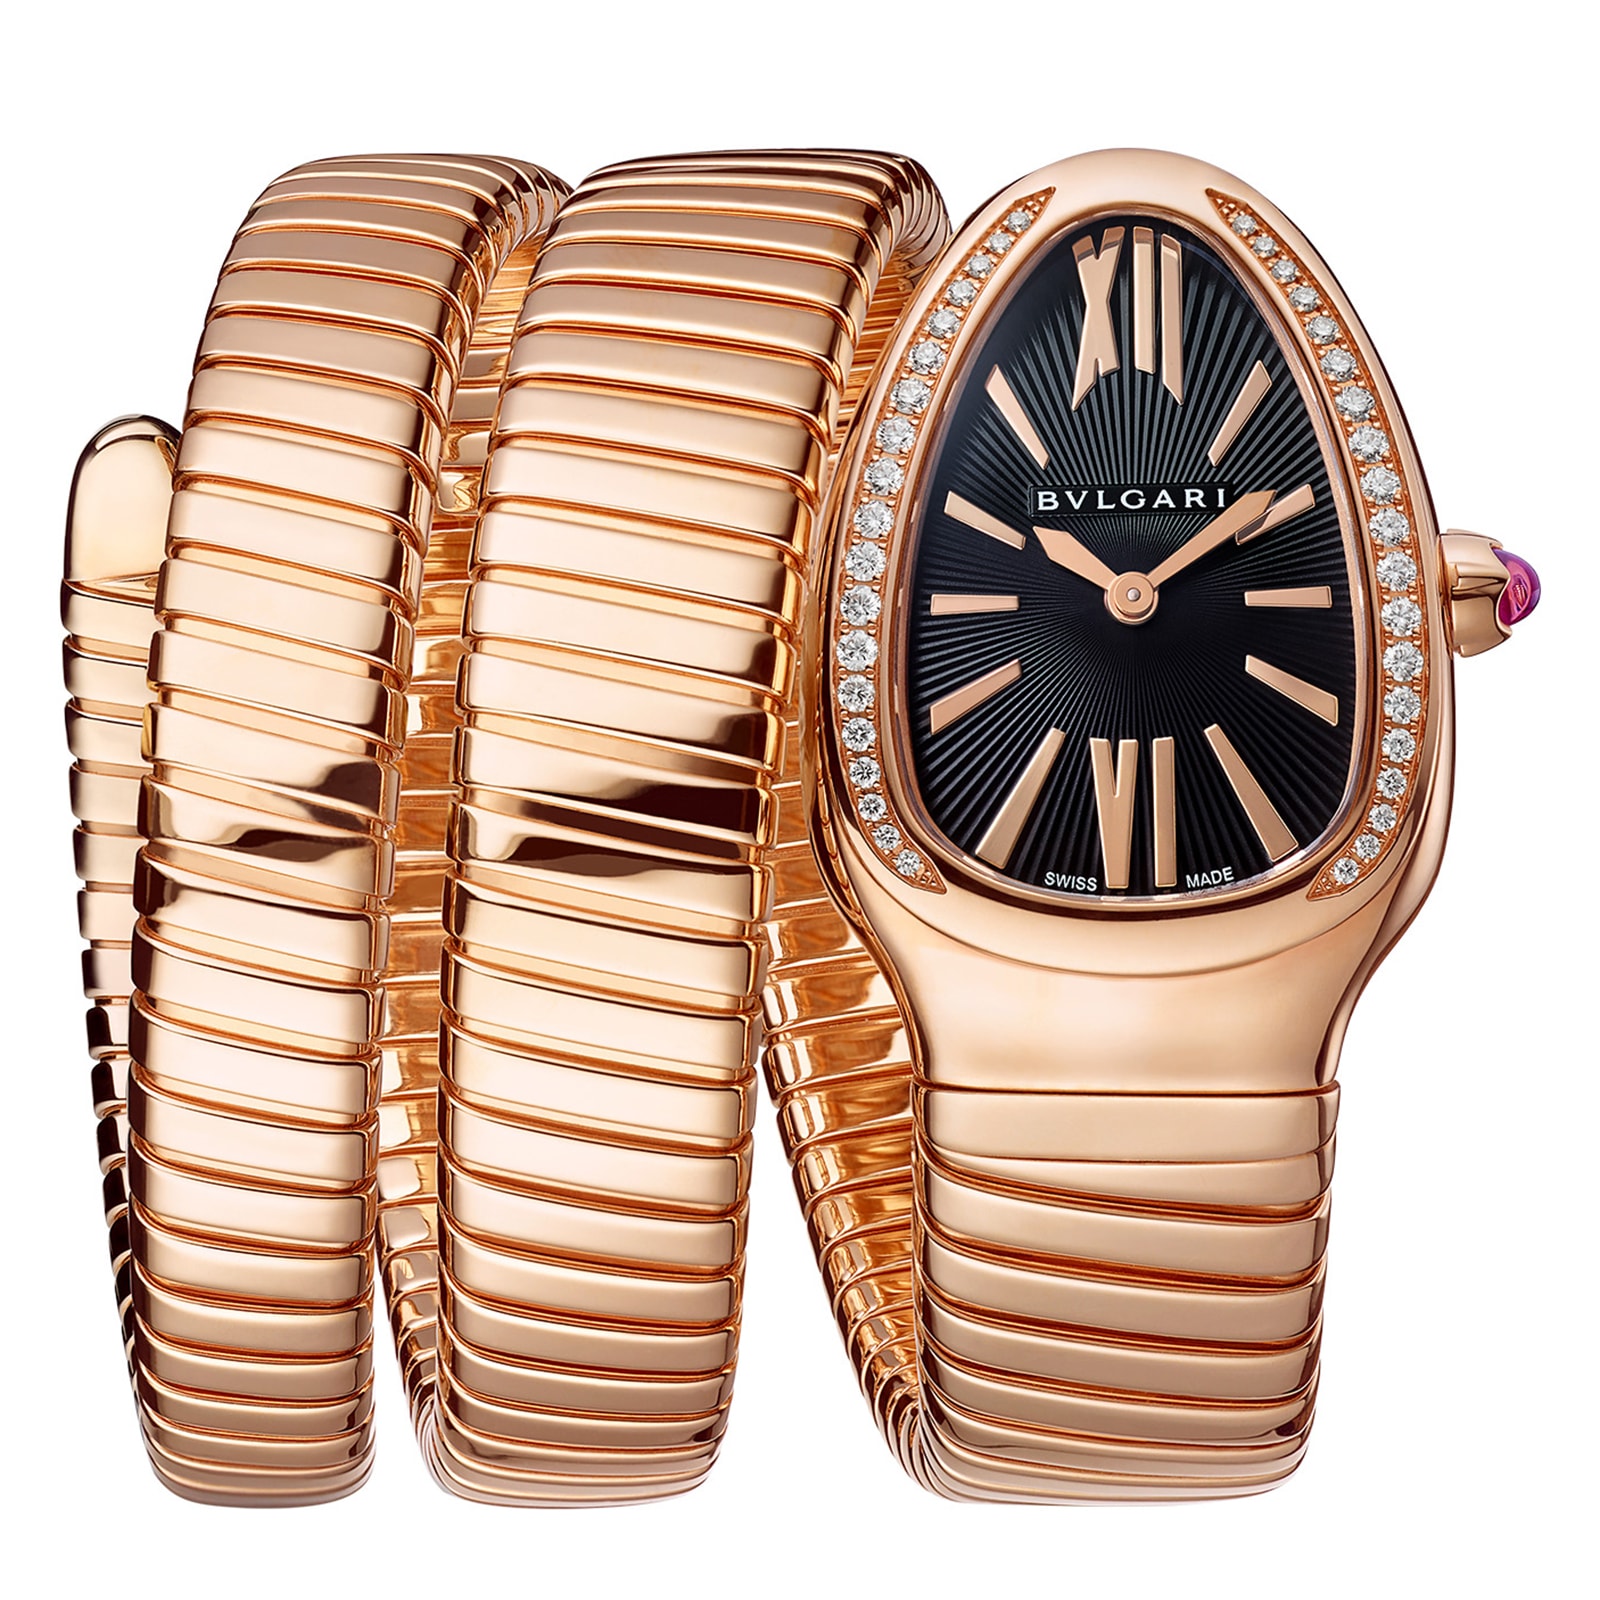 Buy Pre-Owned Bvlgari Watches for Men & Women